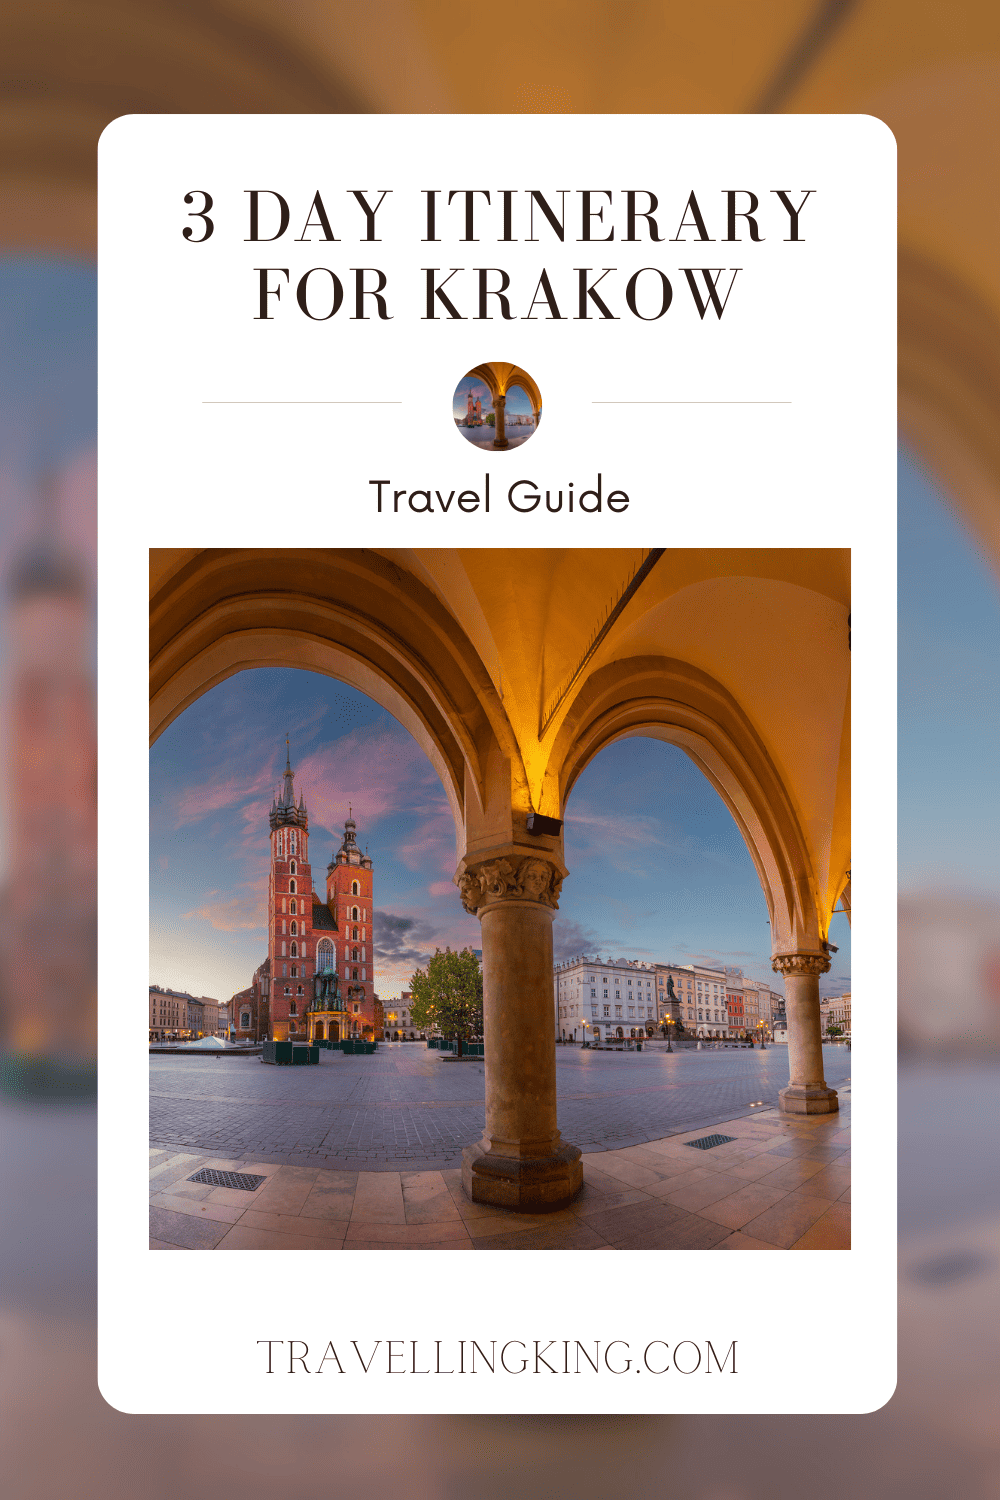 3 Days itinerary for Krakow